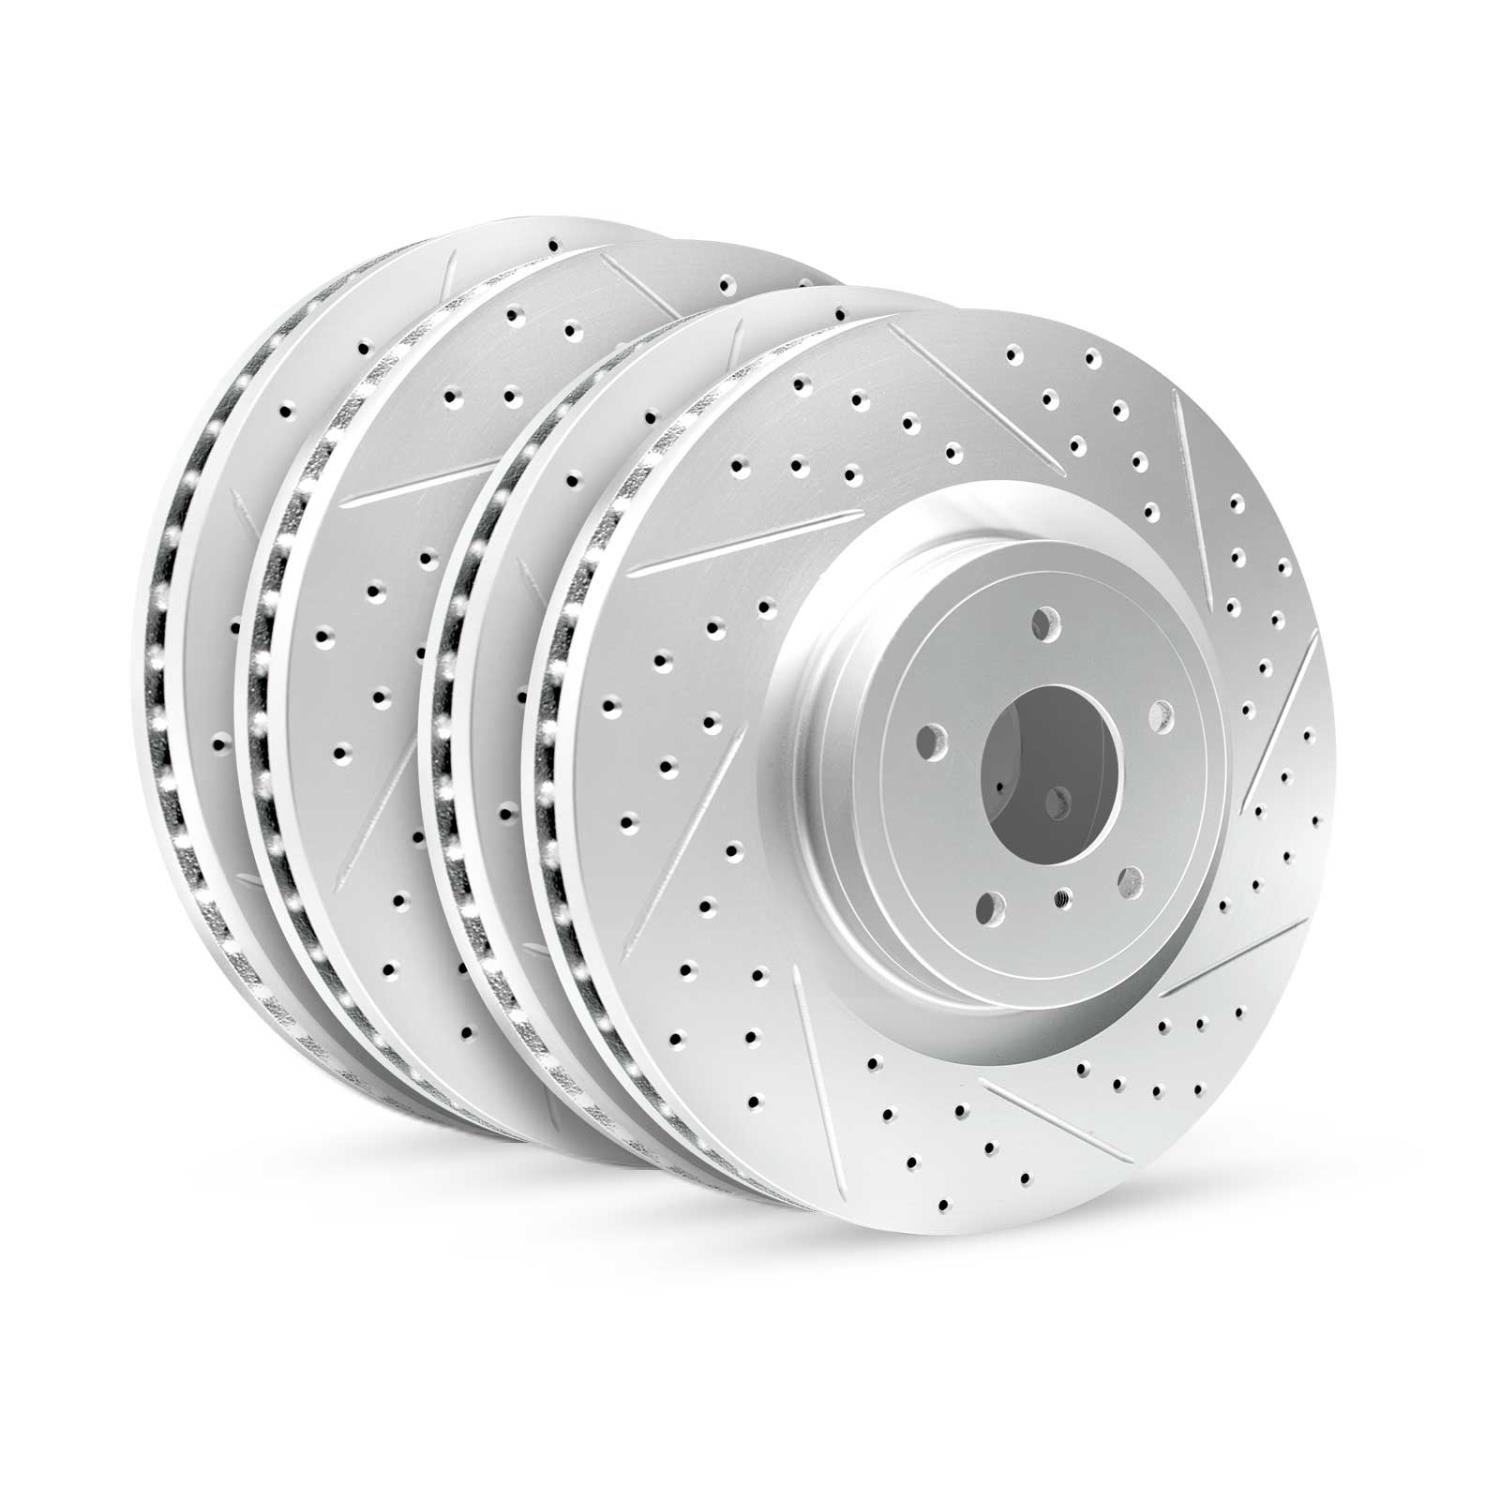 GEO-Carbon Drilled/Slotted Rotors, 2015-2020 Kia/Hyundai/Genesis, Position: Front/Rear